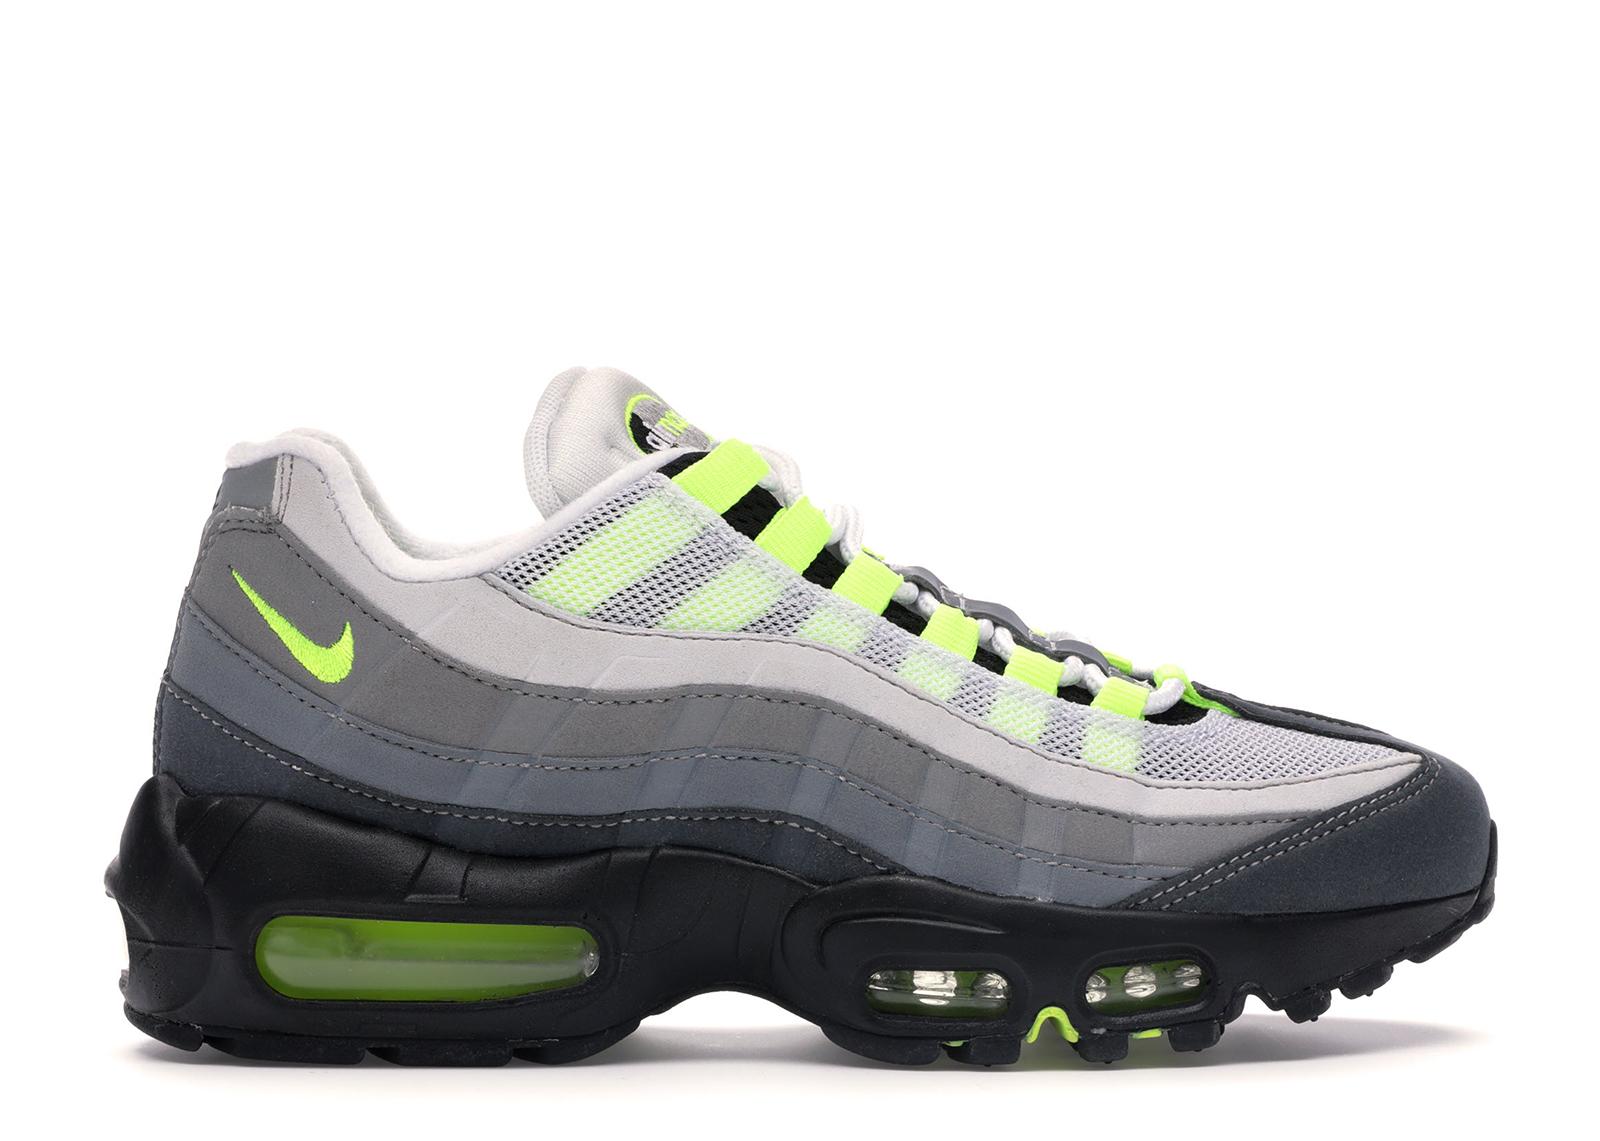 Nike Air Max 95 Og Neon 2015 (w) in Gray - Lyst